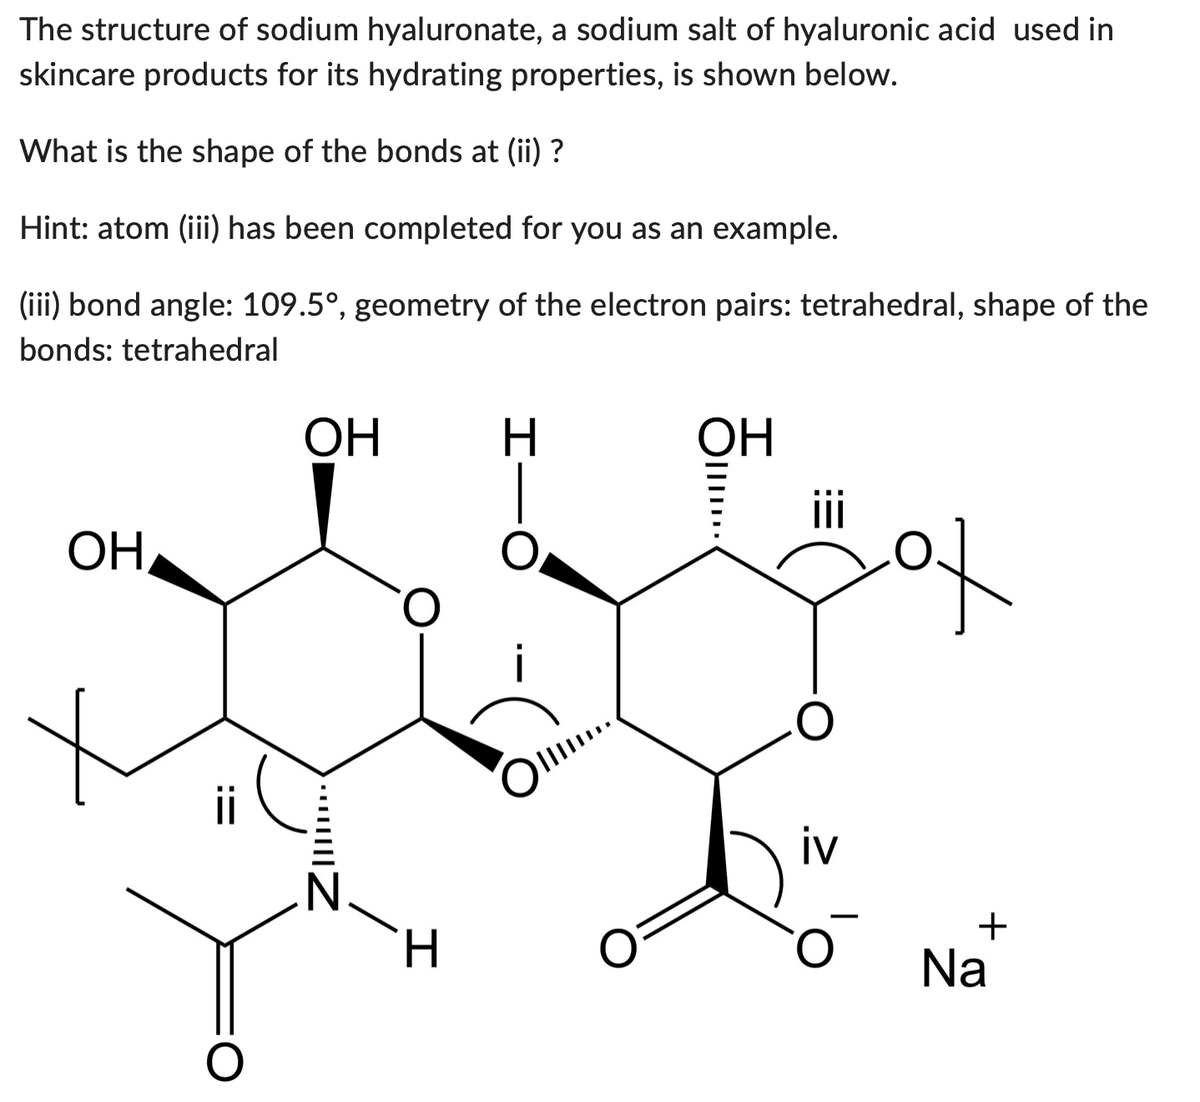 The structure of sodium hyaluronate, a sodium salt of hyaluronic acid used in
skincare products for its hydrating properties, is shown below.
What is the shape of the bonds at (ii) ?
Hint: atom (iii) has been completed for you as an example.
(iii) bond angle: 109.5°, geometry of the electron pairs: tetrahedral, shape of the
bonds: tetrahedral
ОН,
OH
·•·•·|||||
N
O
H
H
Ol..
OH
||||
iv
+
Na